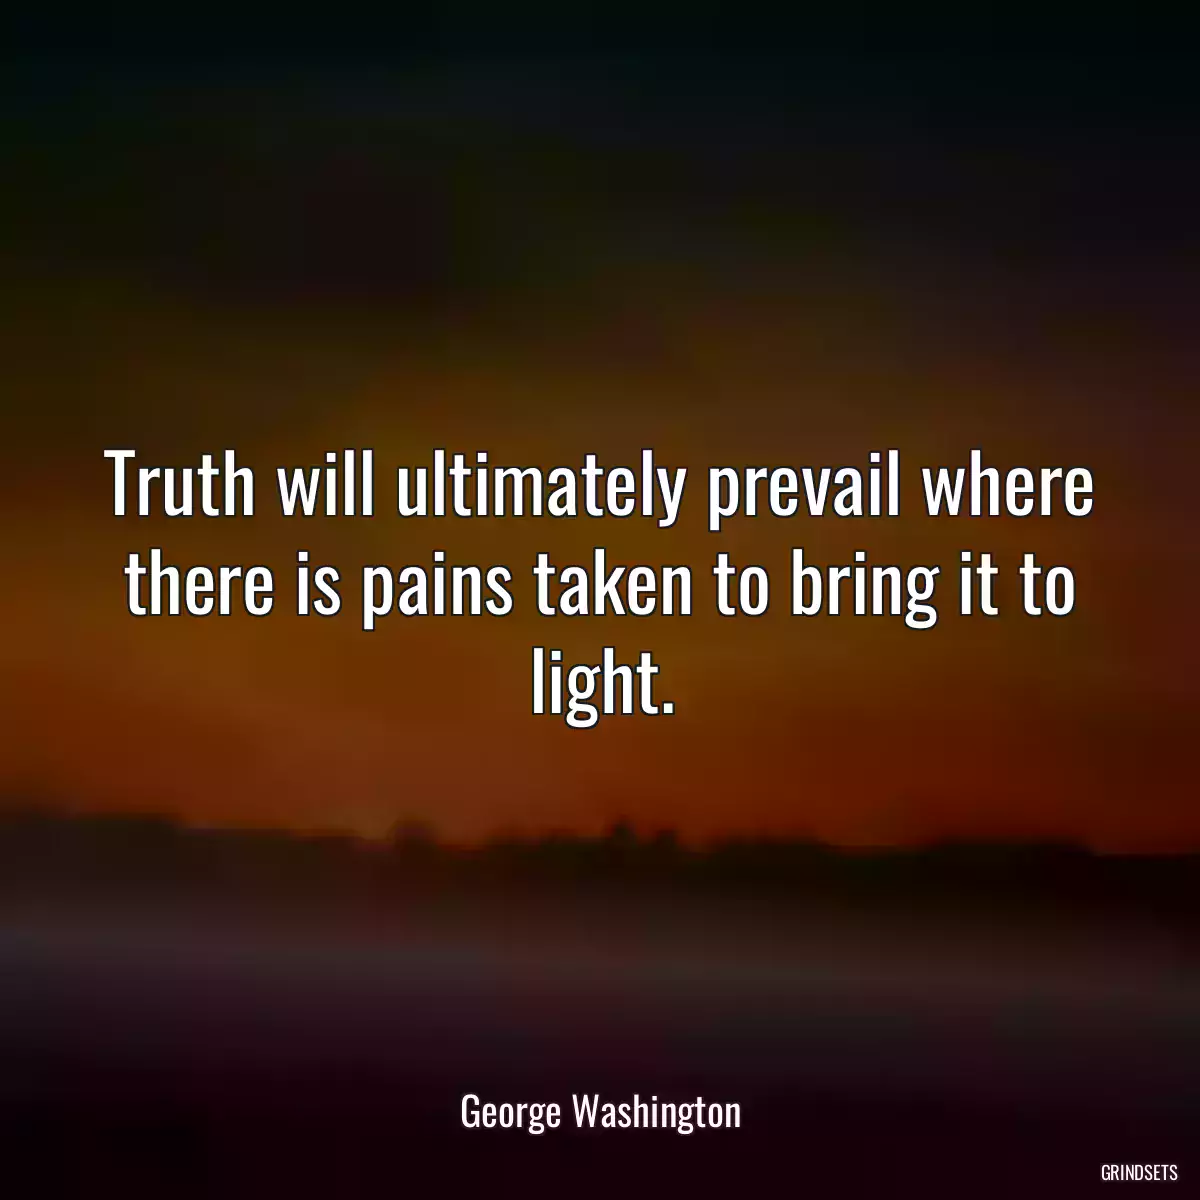 Truth will ultimately prevail where there is pains taken to bring it to light.